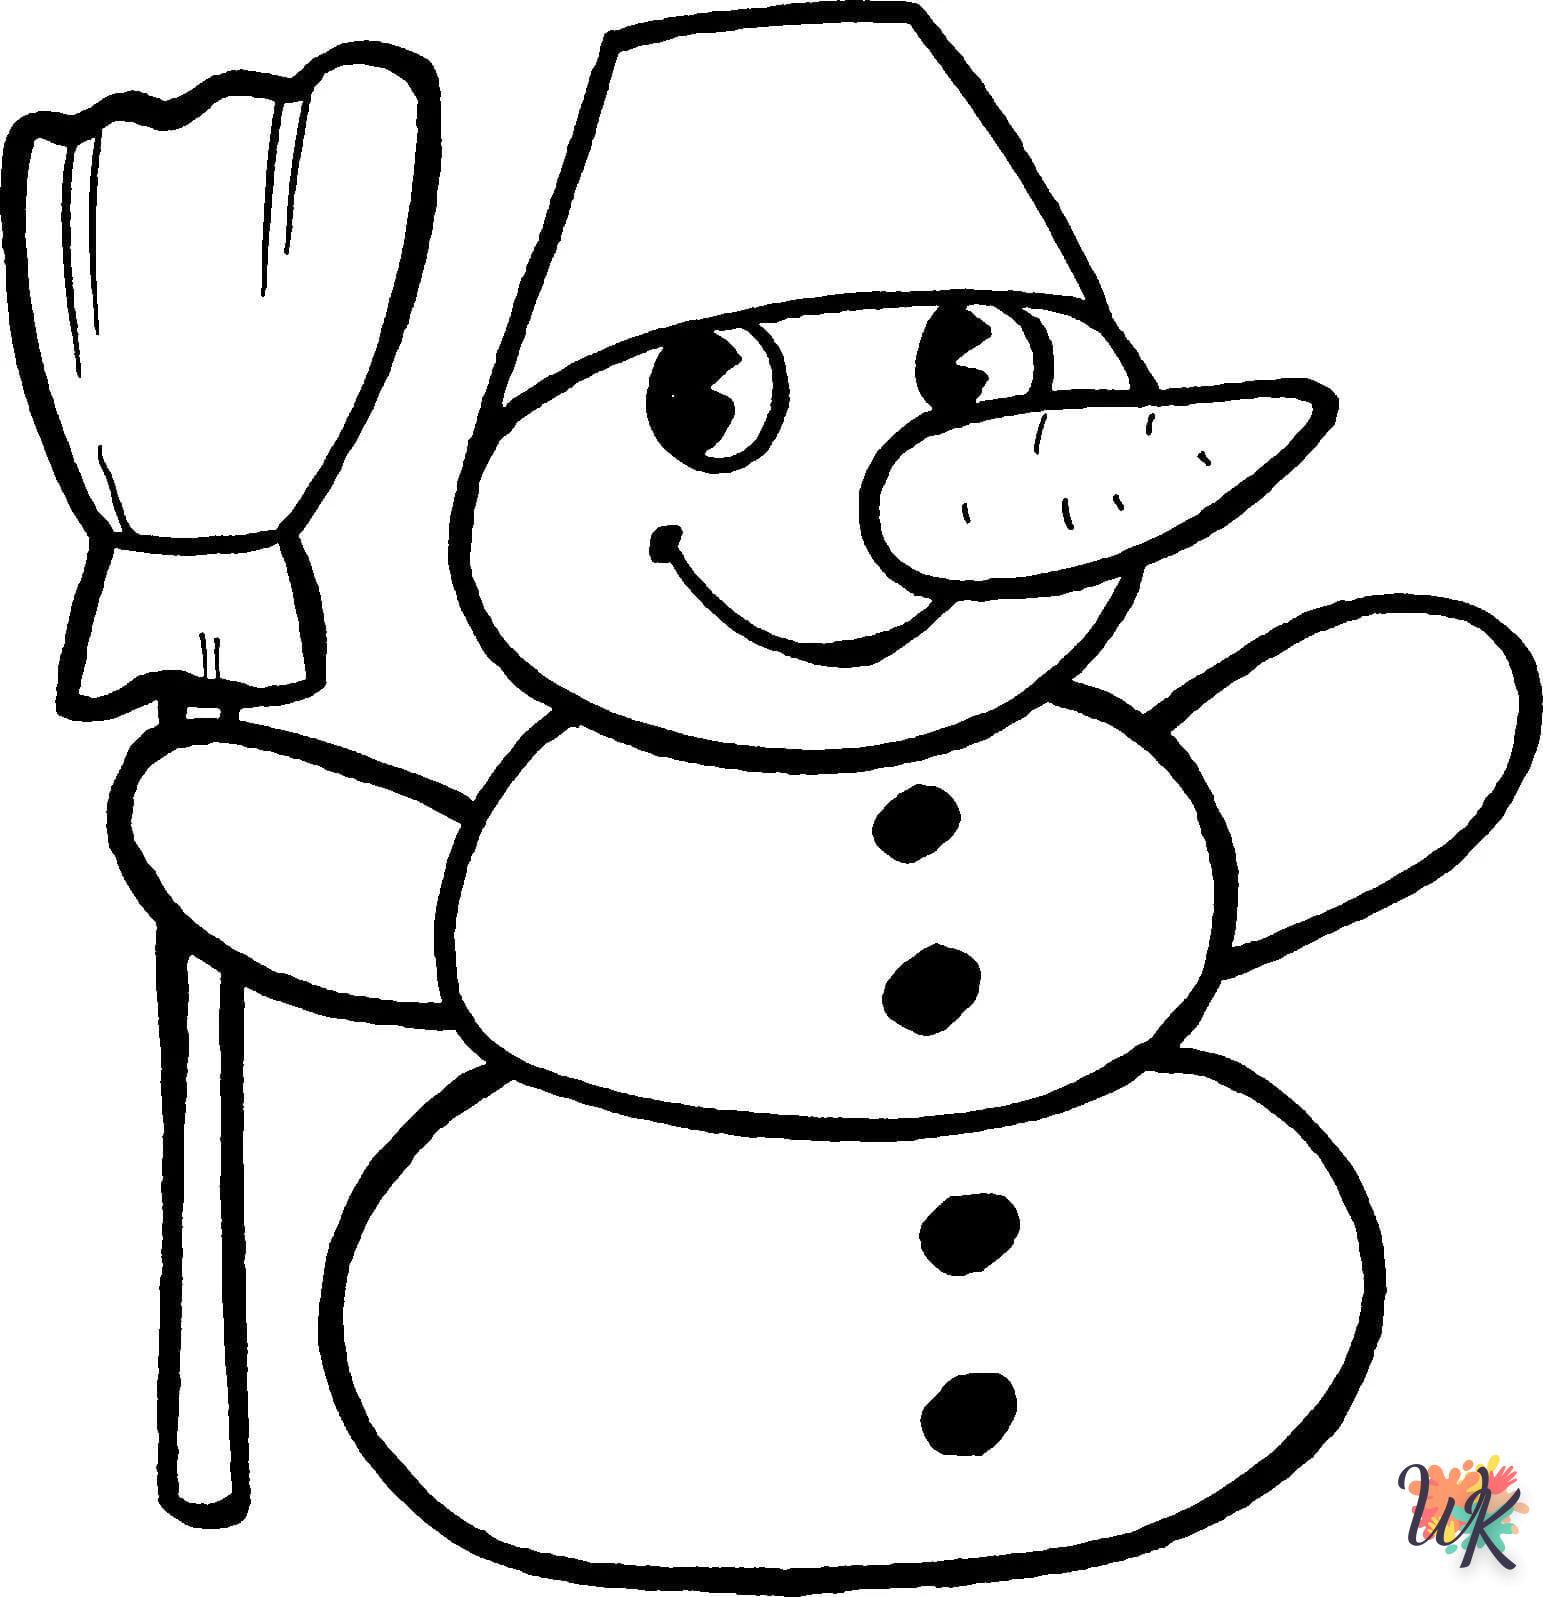 Snowman coloring online to print 2